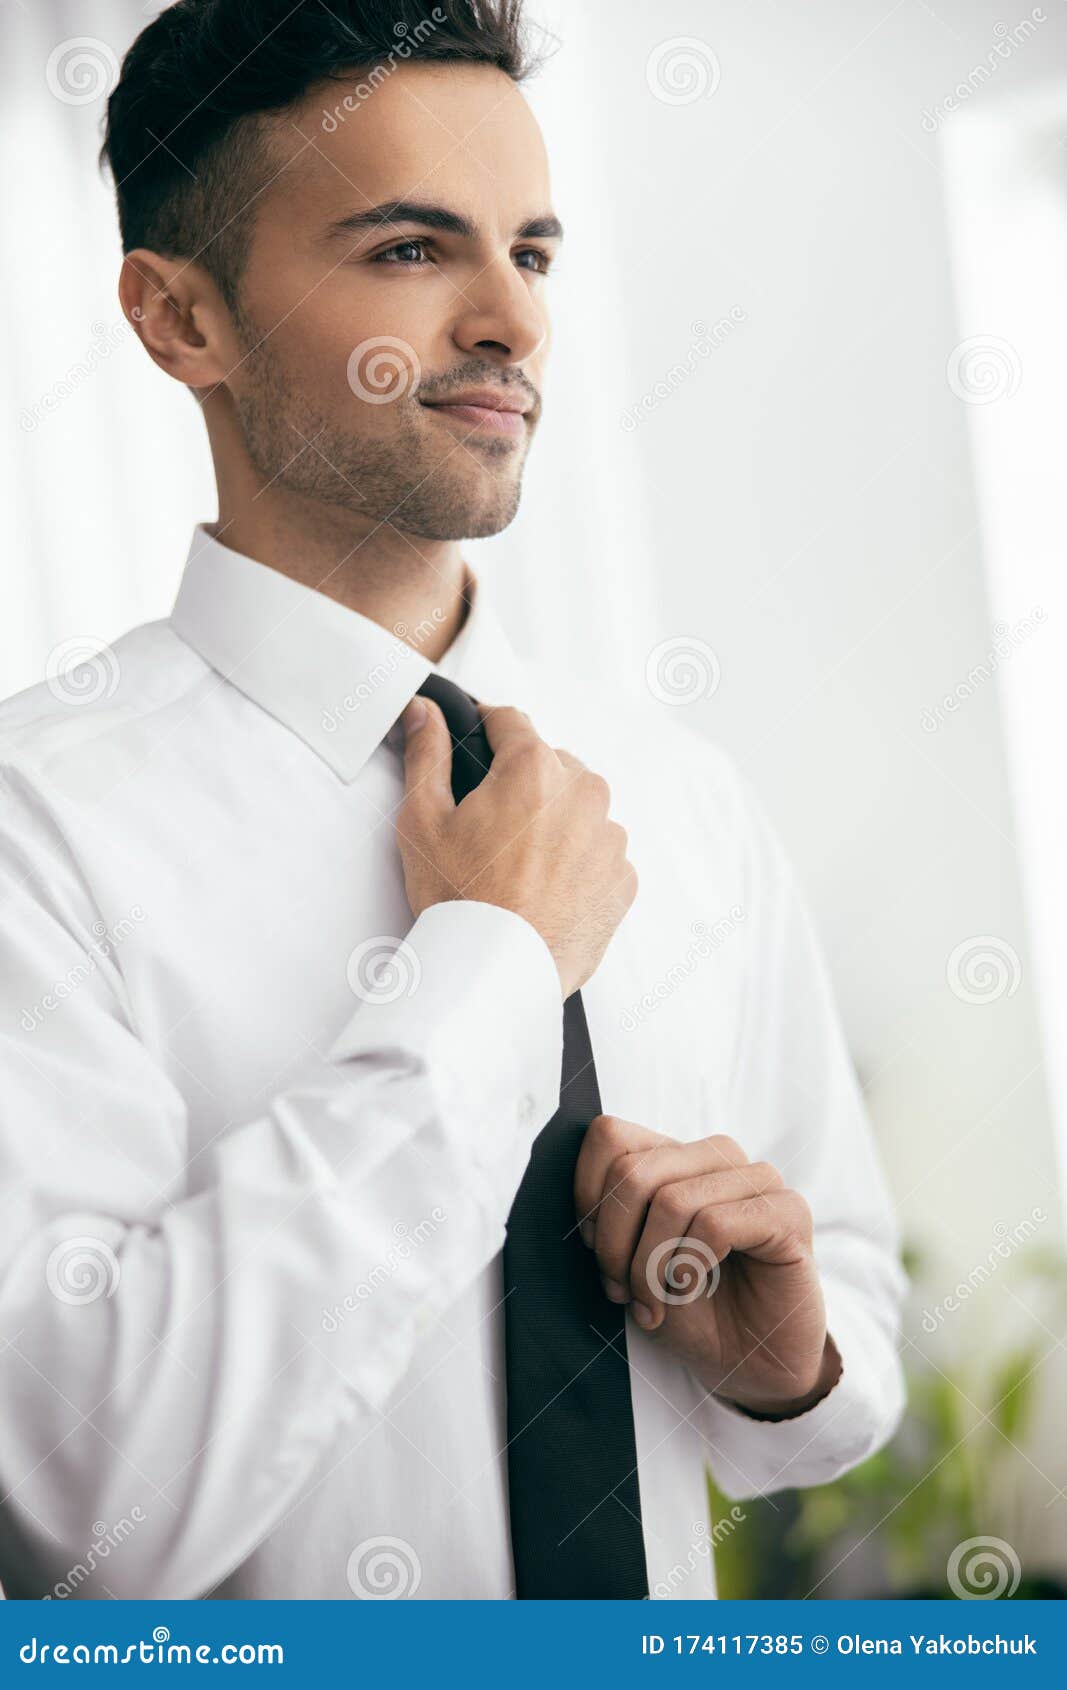 Stylish Man Wearing White Shirt in Room Stock Image - Image of casual ...